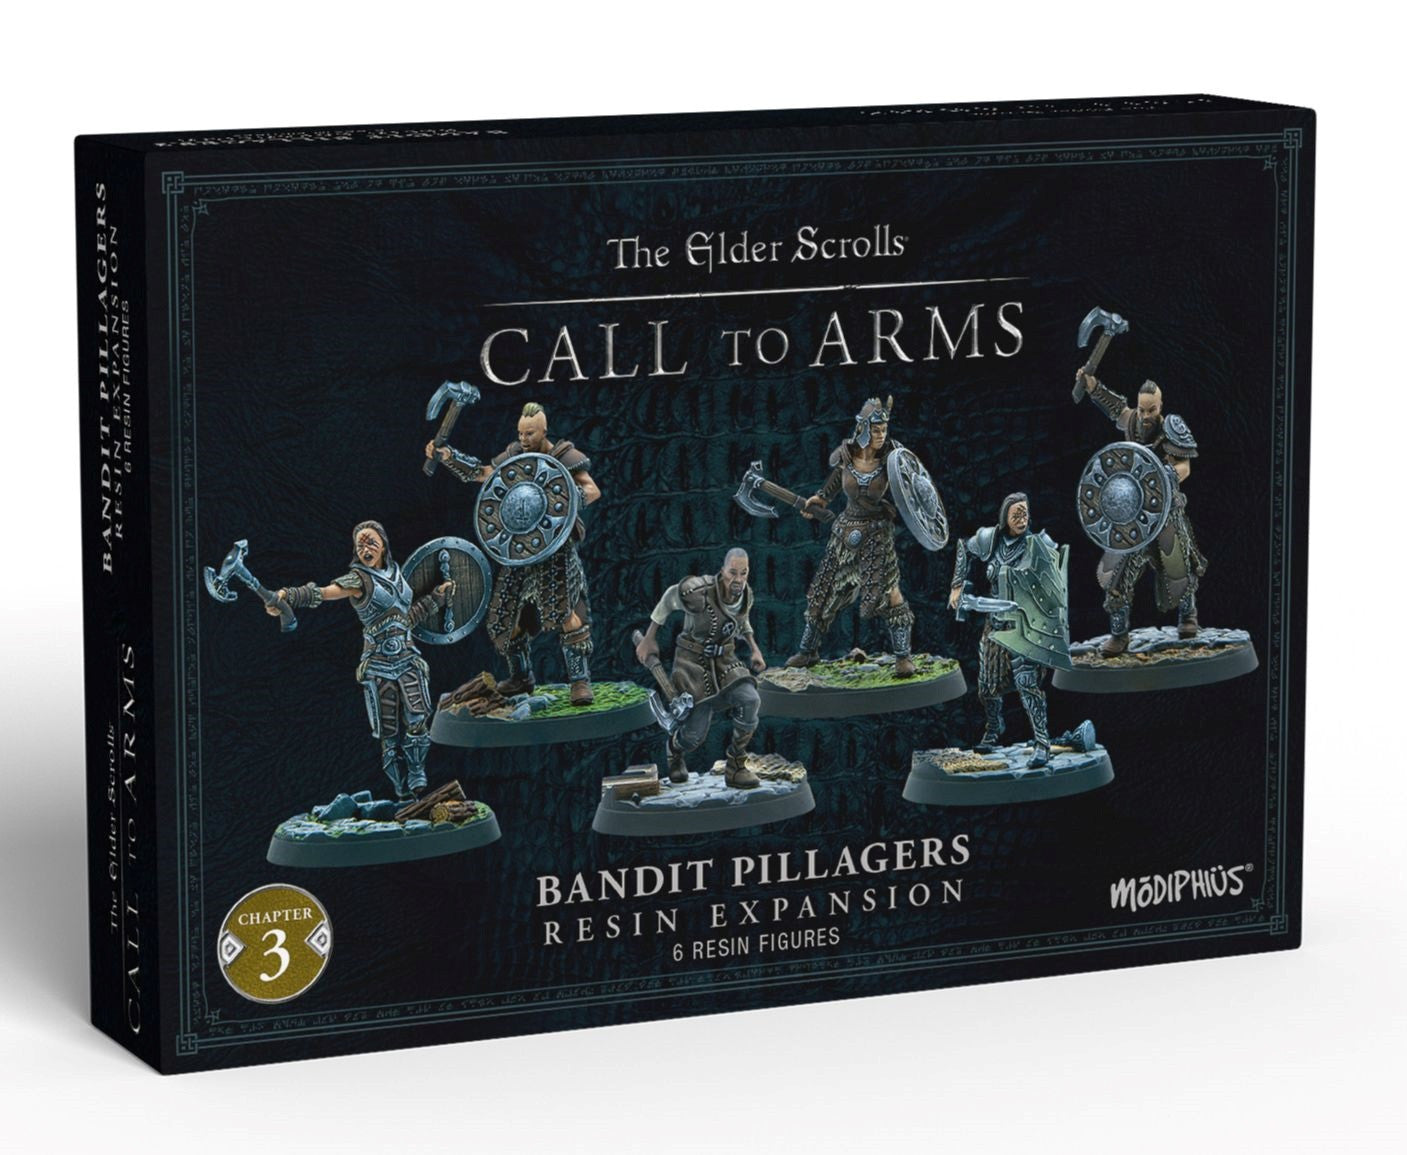 The Elder Scrolls Call to Arms Bandit Pillagers